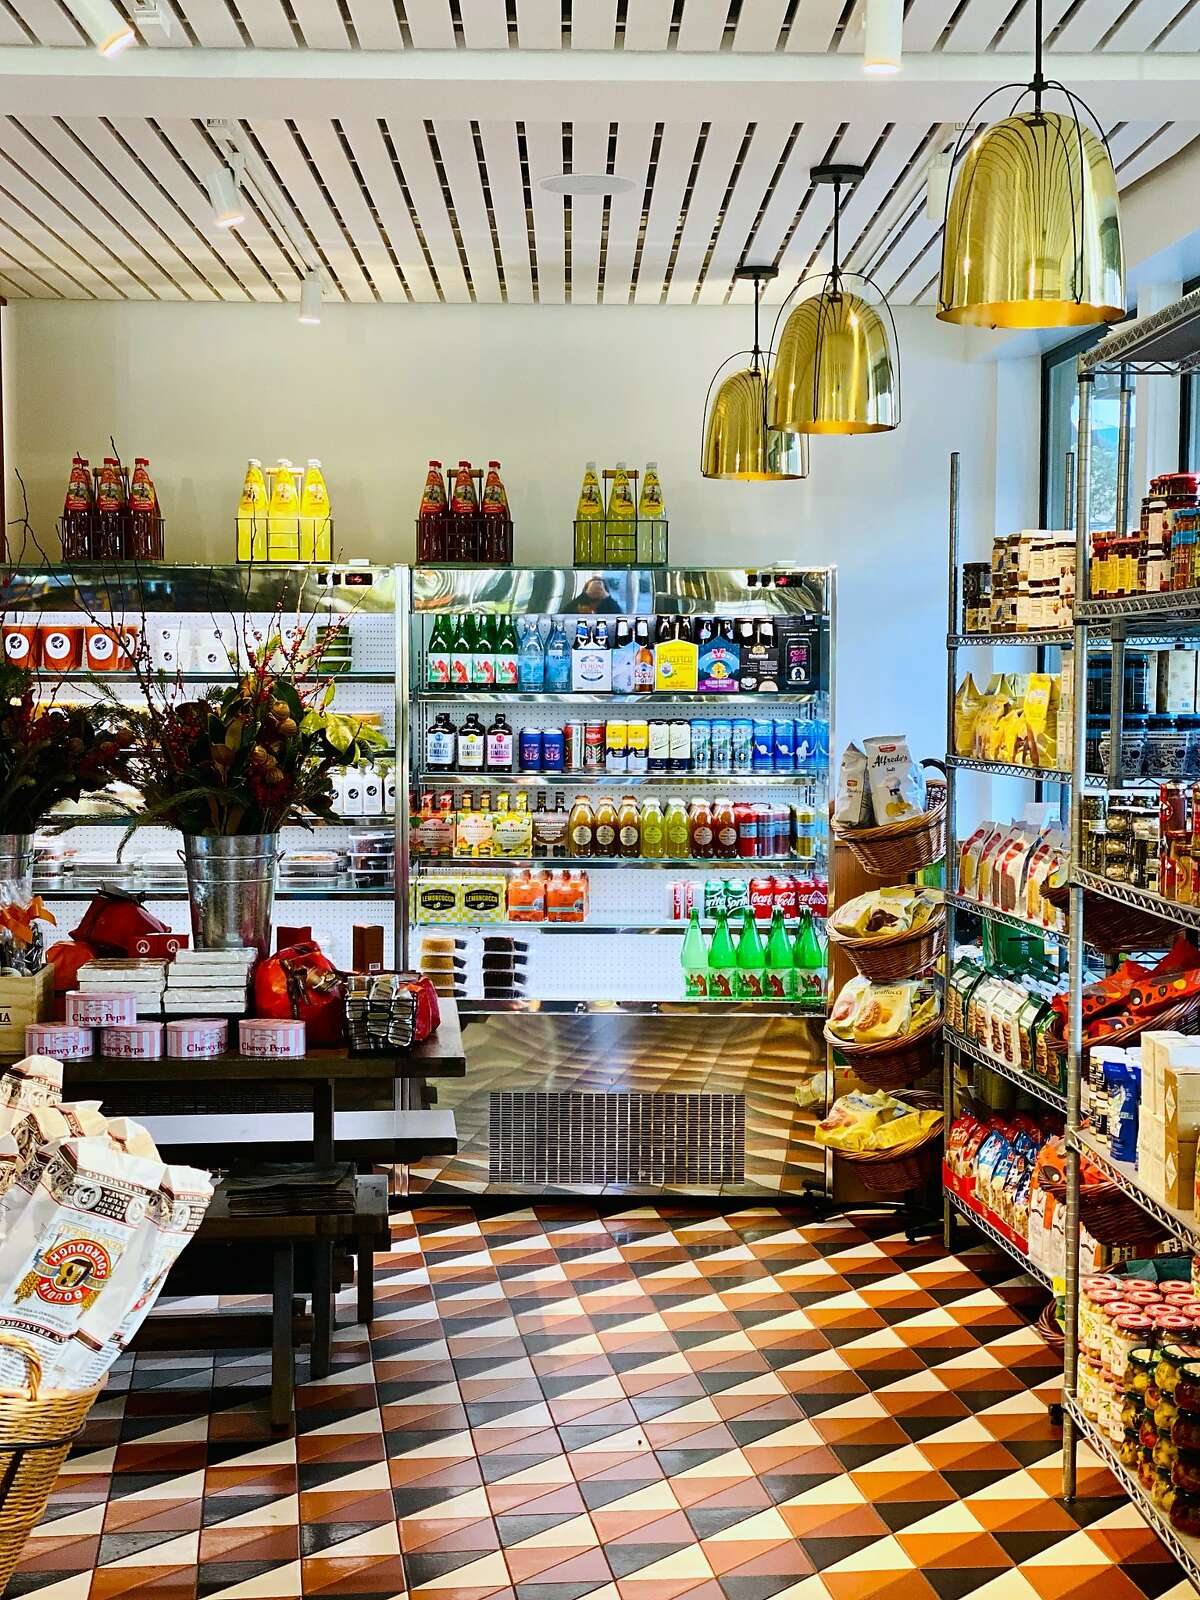 The interior of Little Original Joe's, which includes a market space where customers can shop for dry goods like flour, or pick up frozen dinners.